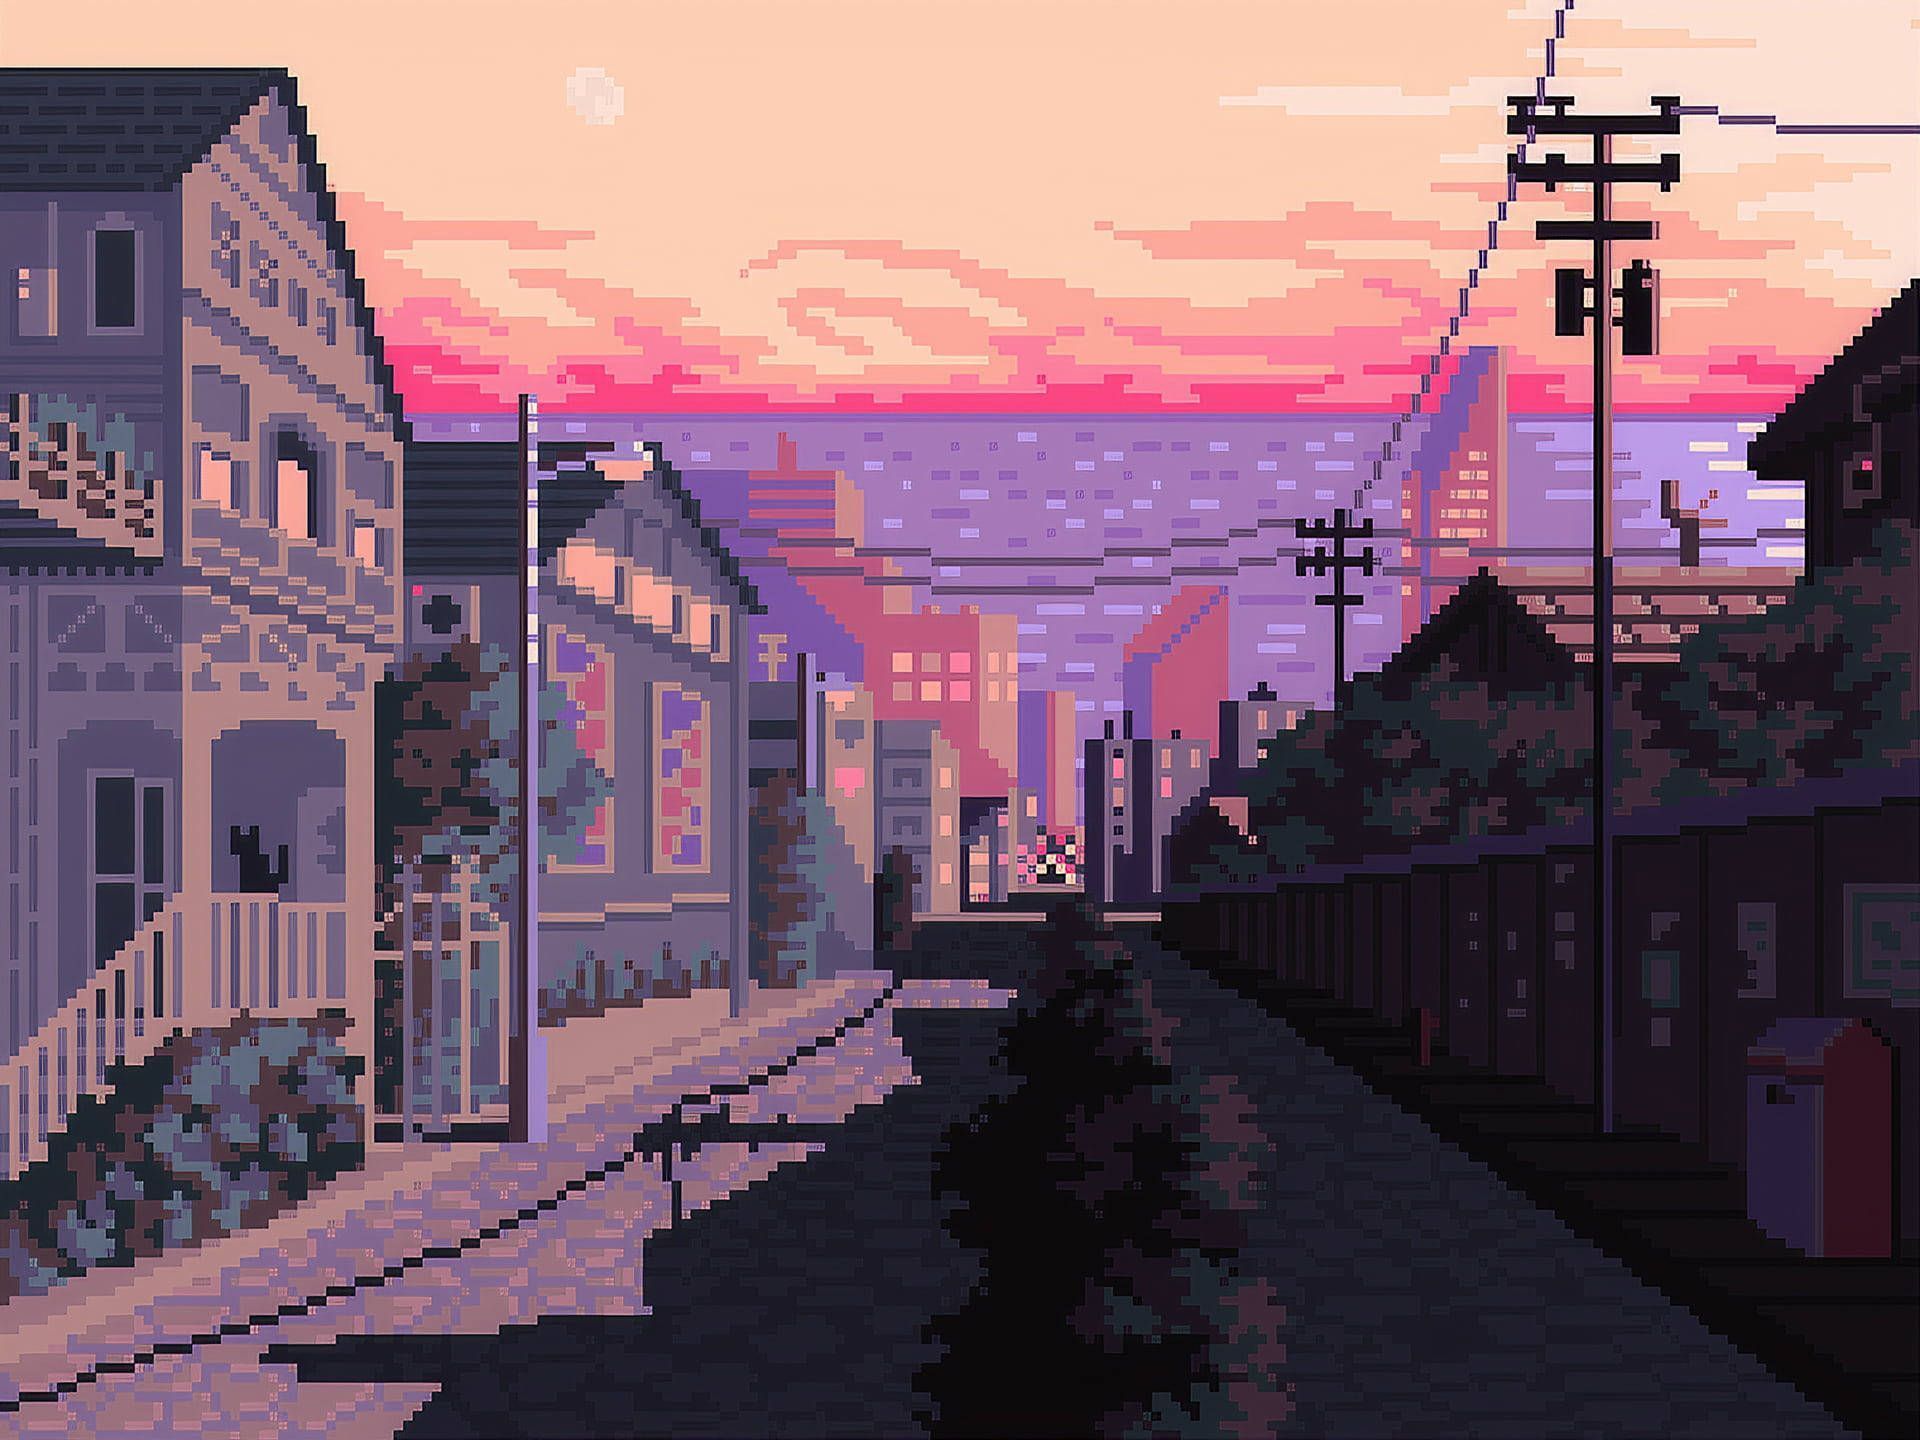 A street scene with houses and trees - Pixel art